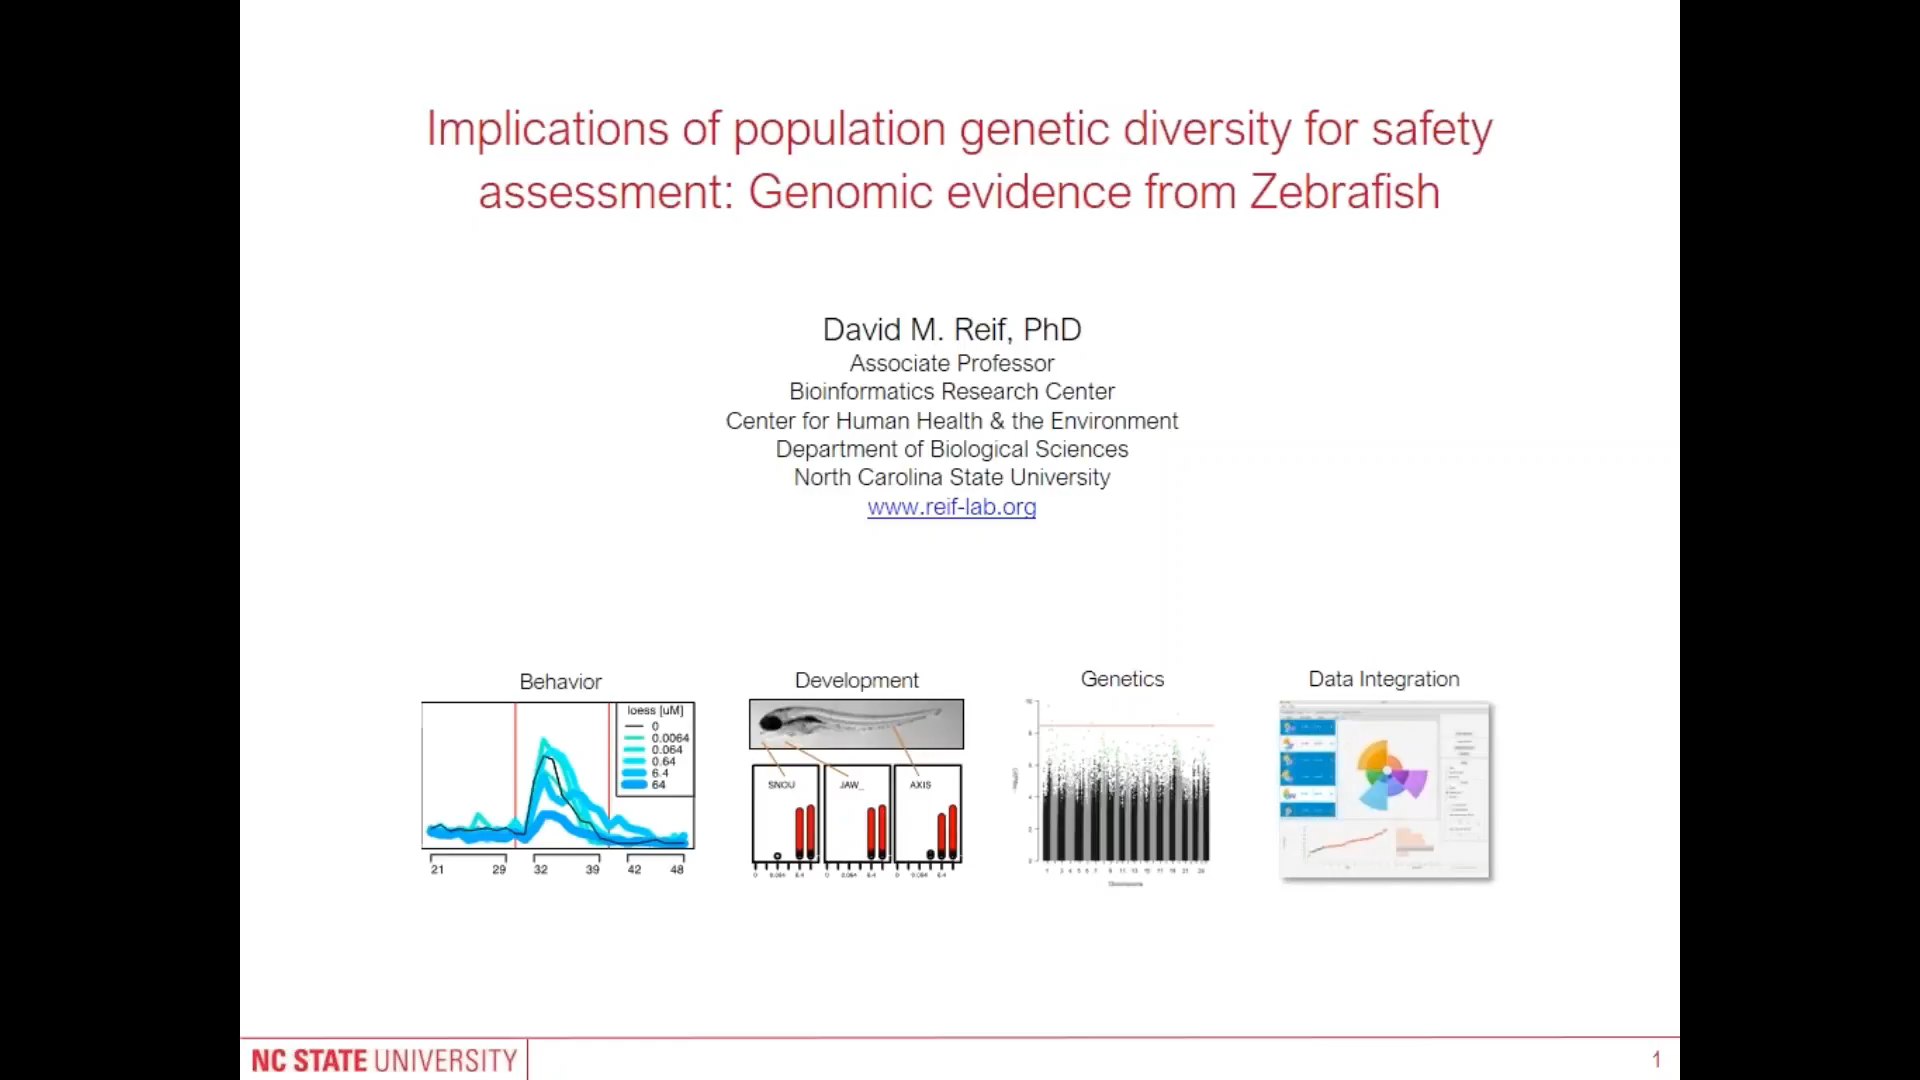 Implications of Population Genetic Diversity For Safety Assessment